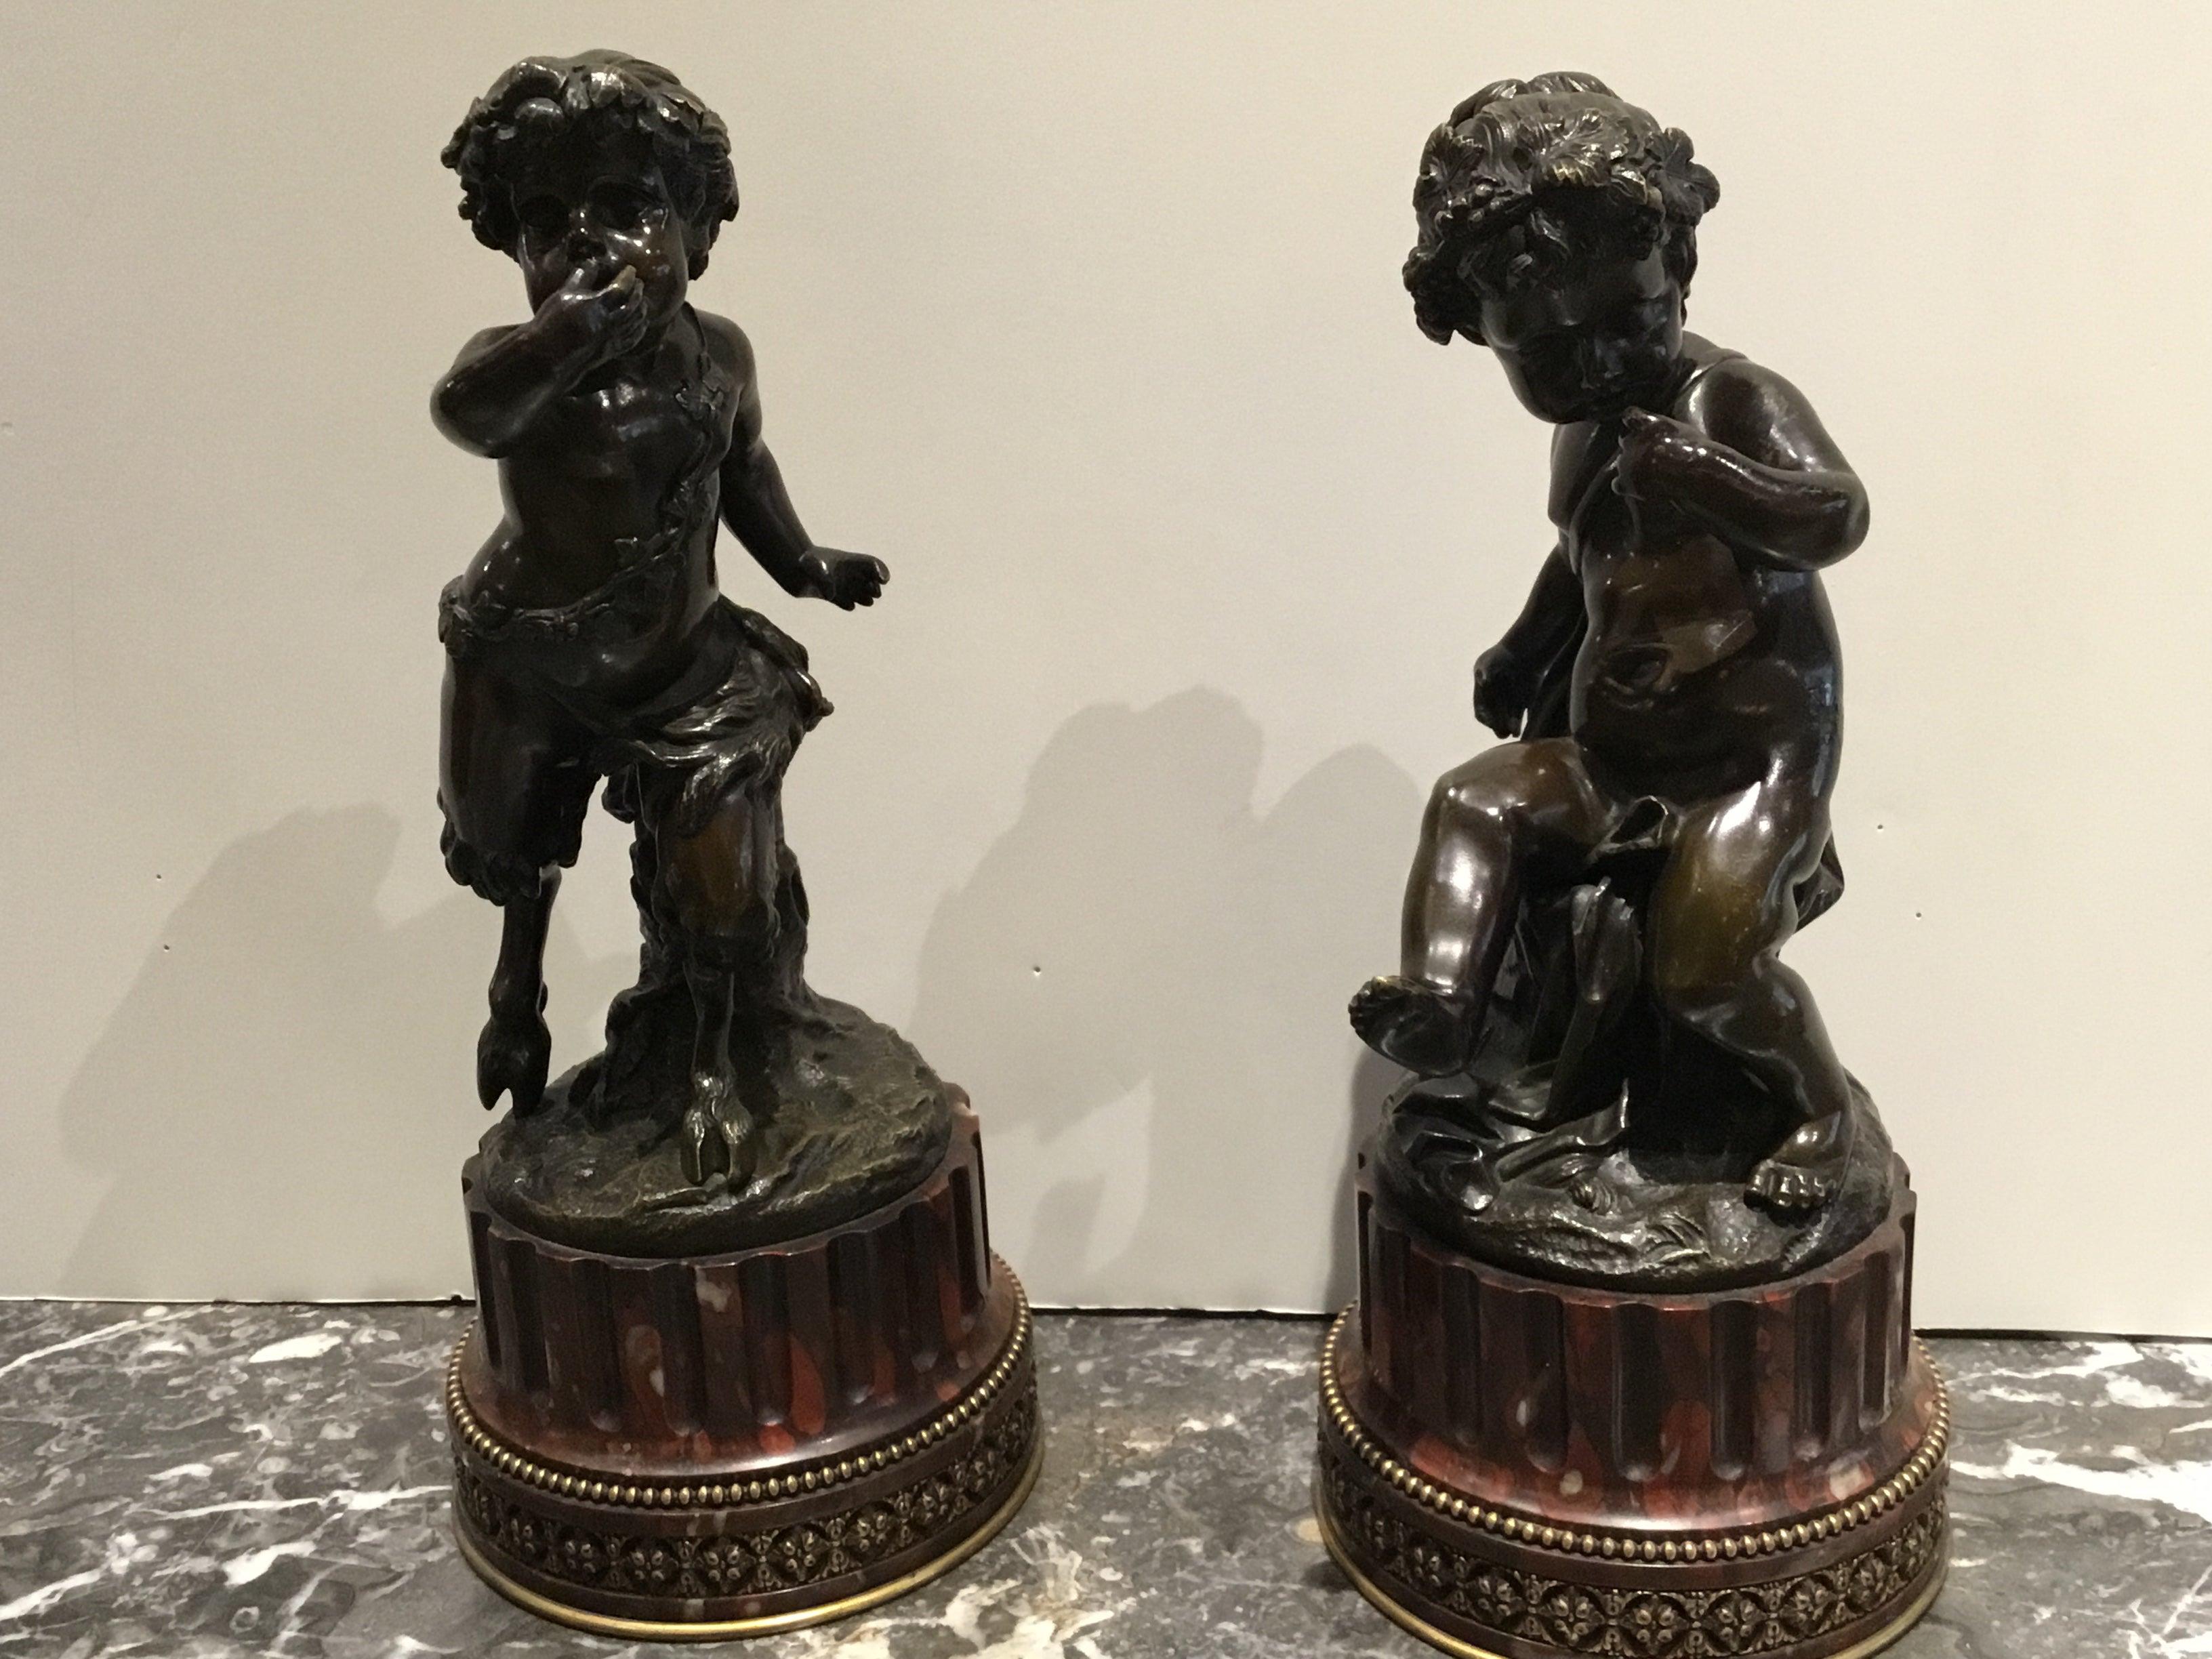 Pair of French Bronze Sculptures of a Nymph and Satyr Signed “Clodion”  For Sale 4